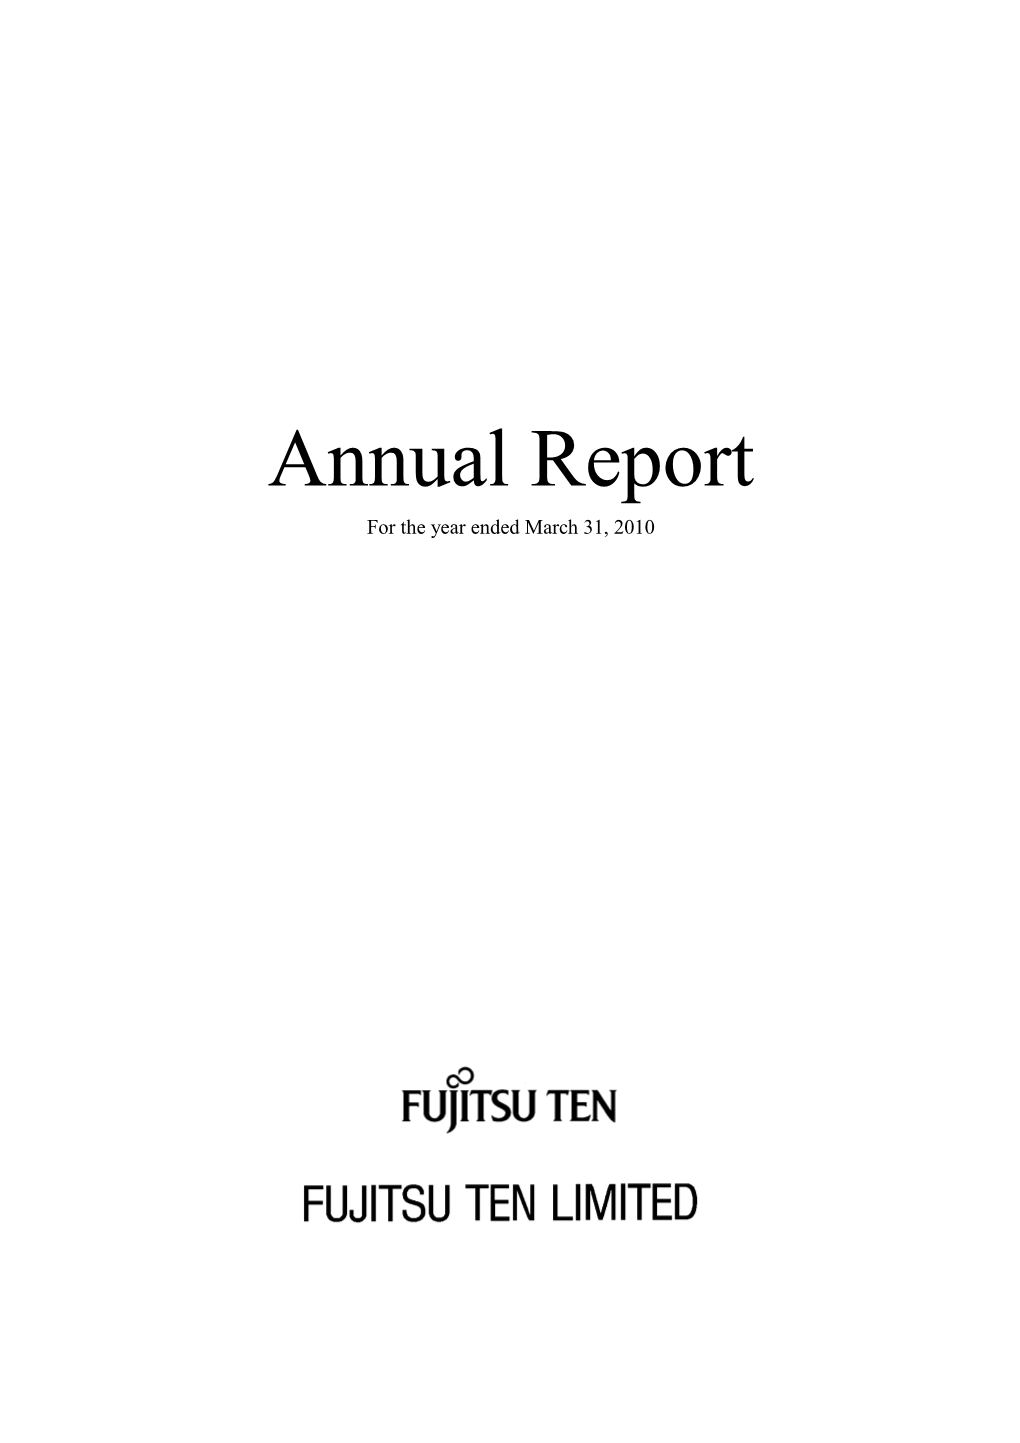 Annual Report for the Year Ended March 31, 2010